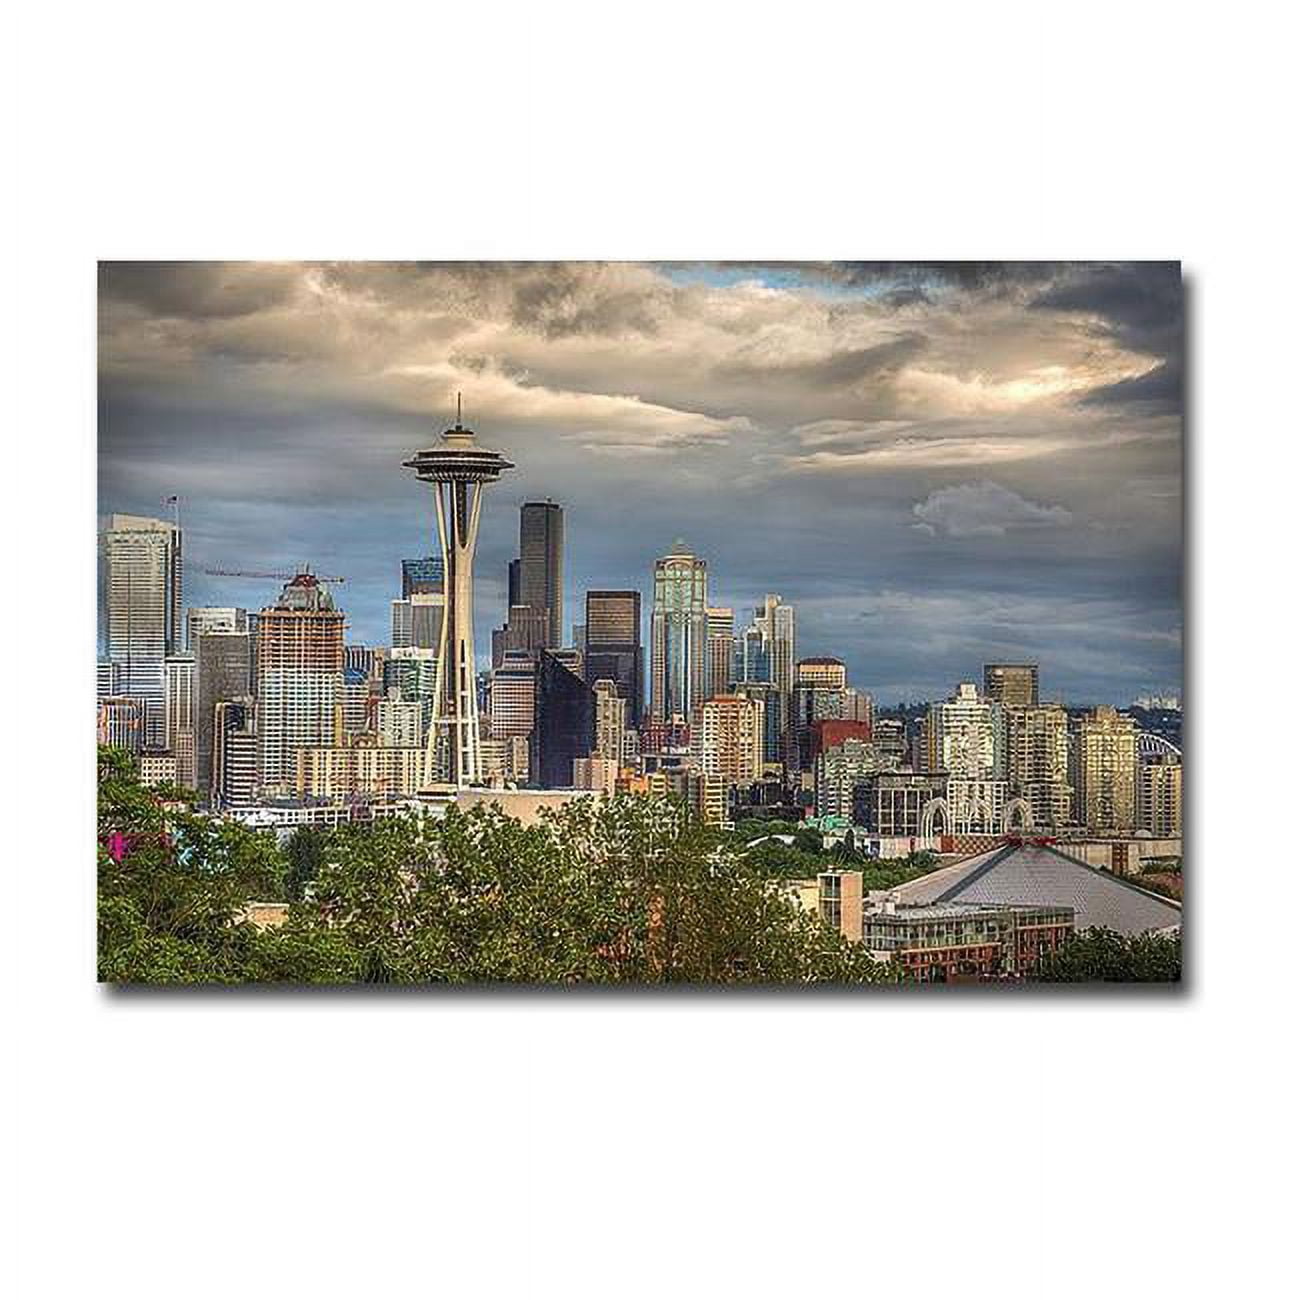 1624p198ig Seattle By Larry J. Taite Premium Gallery-wrapped Canvas Giclee Art - 16 X 24 X 1.5 In.